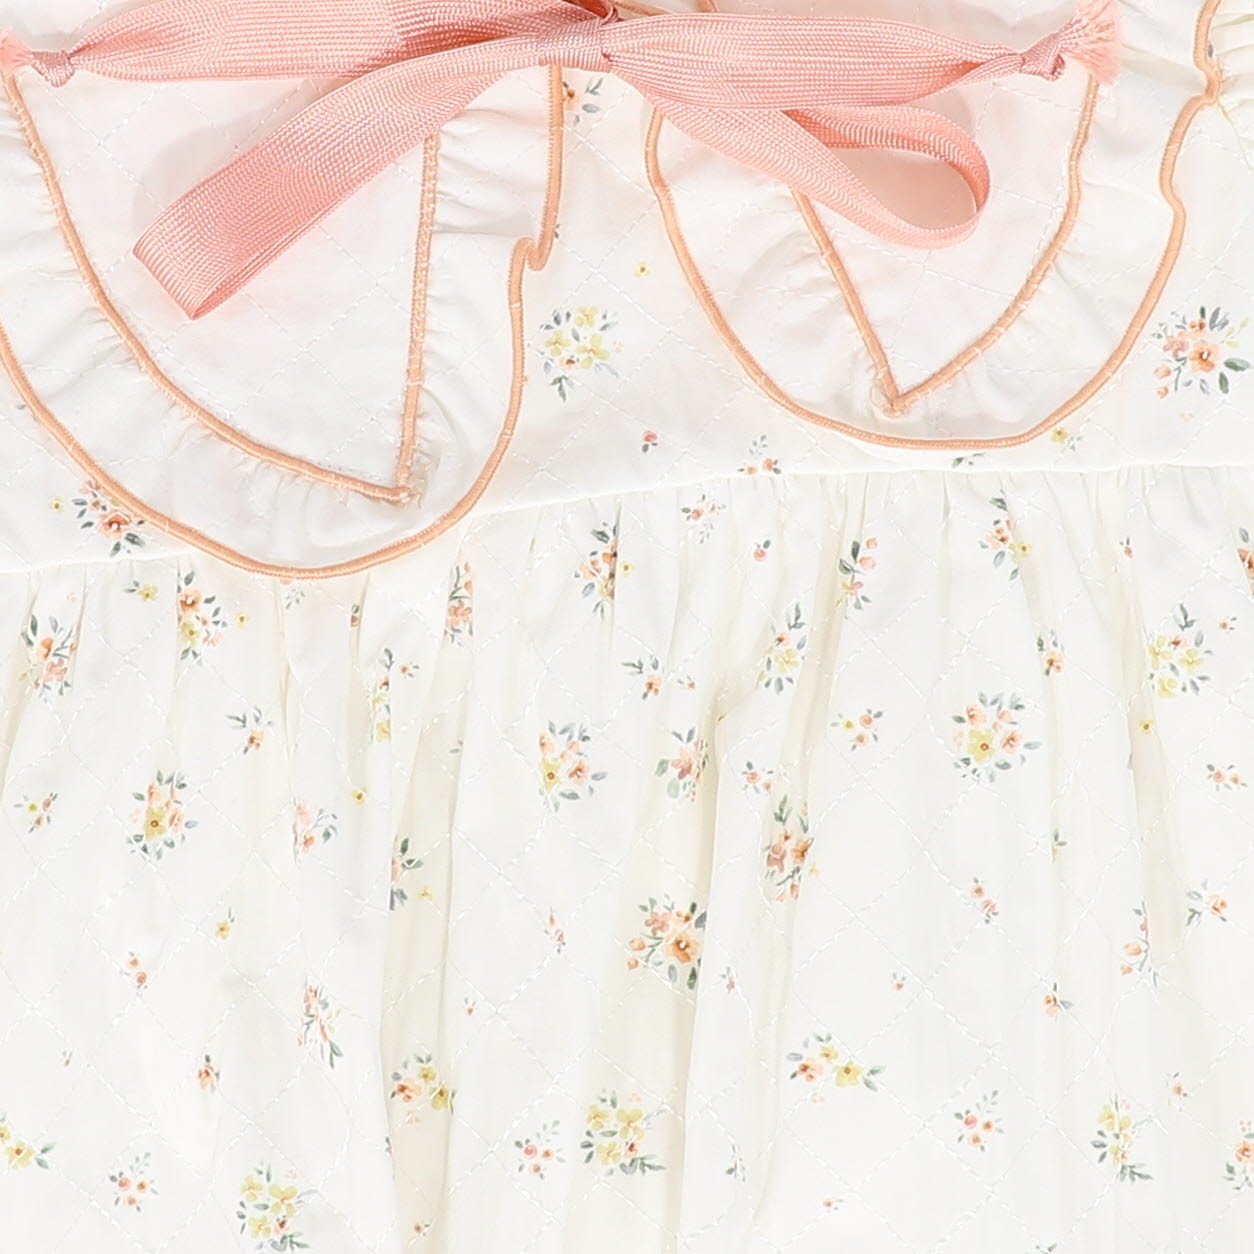 COSMOSOPHIE WHITE QUILTED SOFT FLORAL DRESS [FINAL SALE]